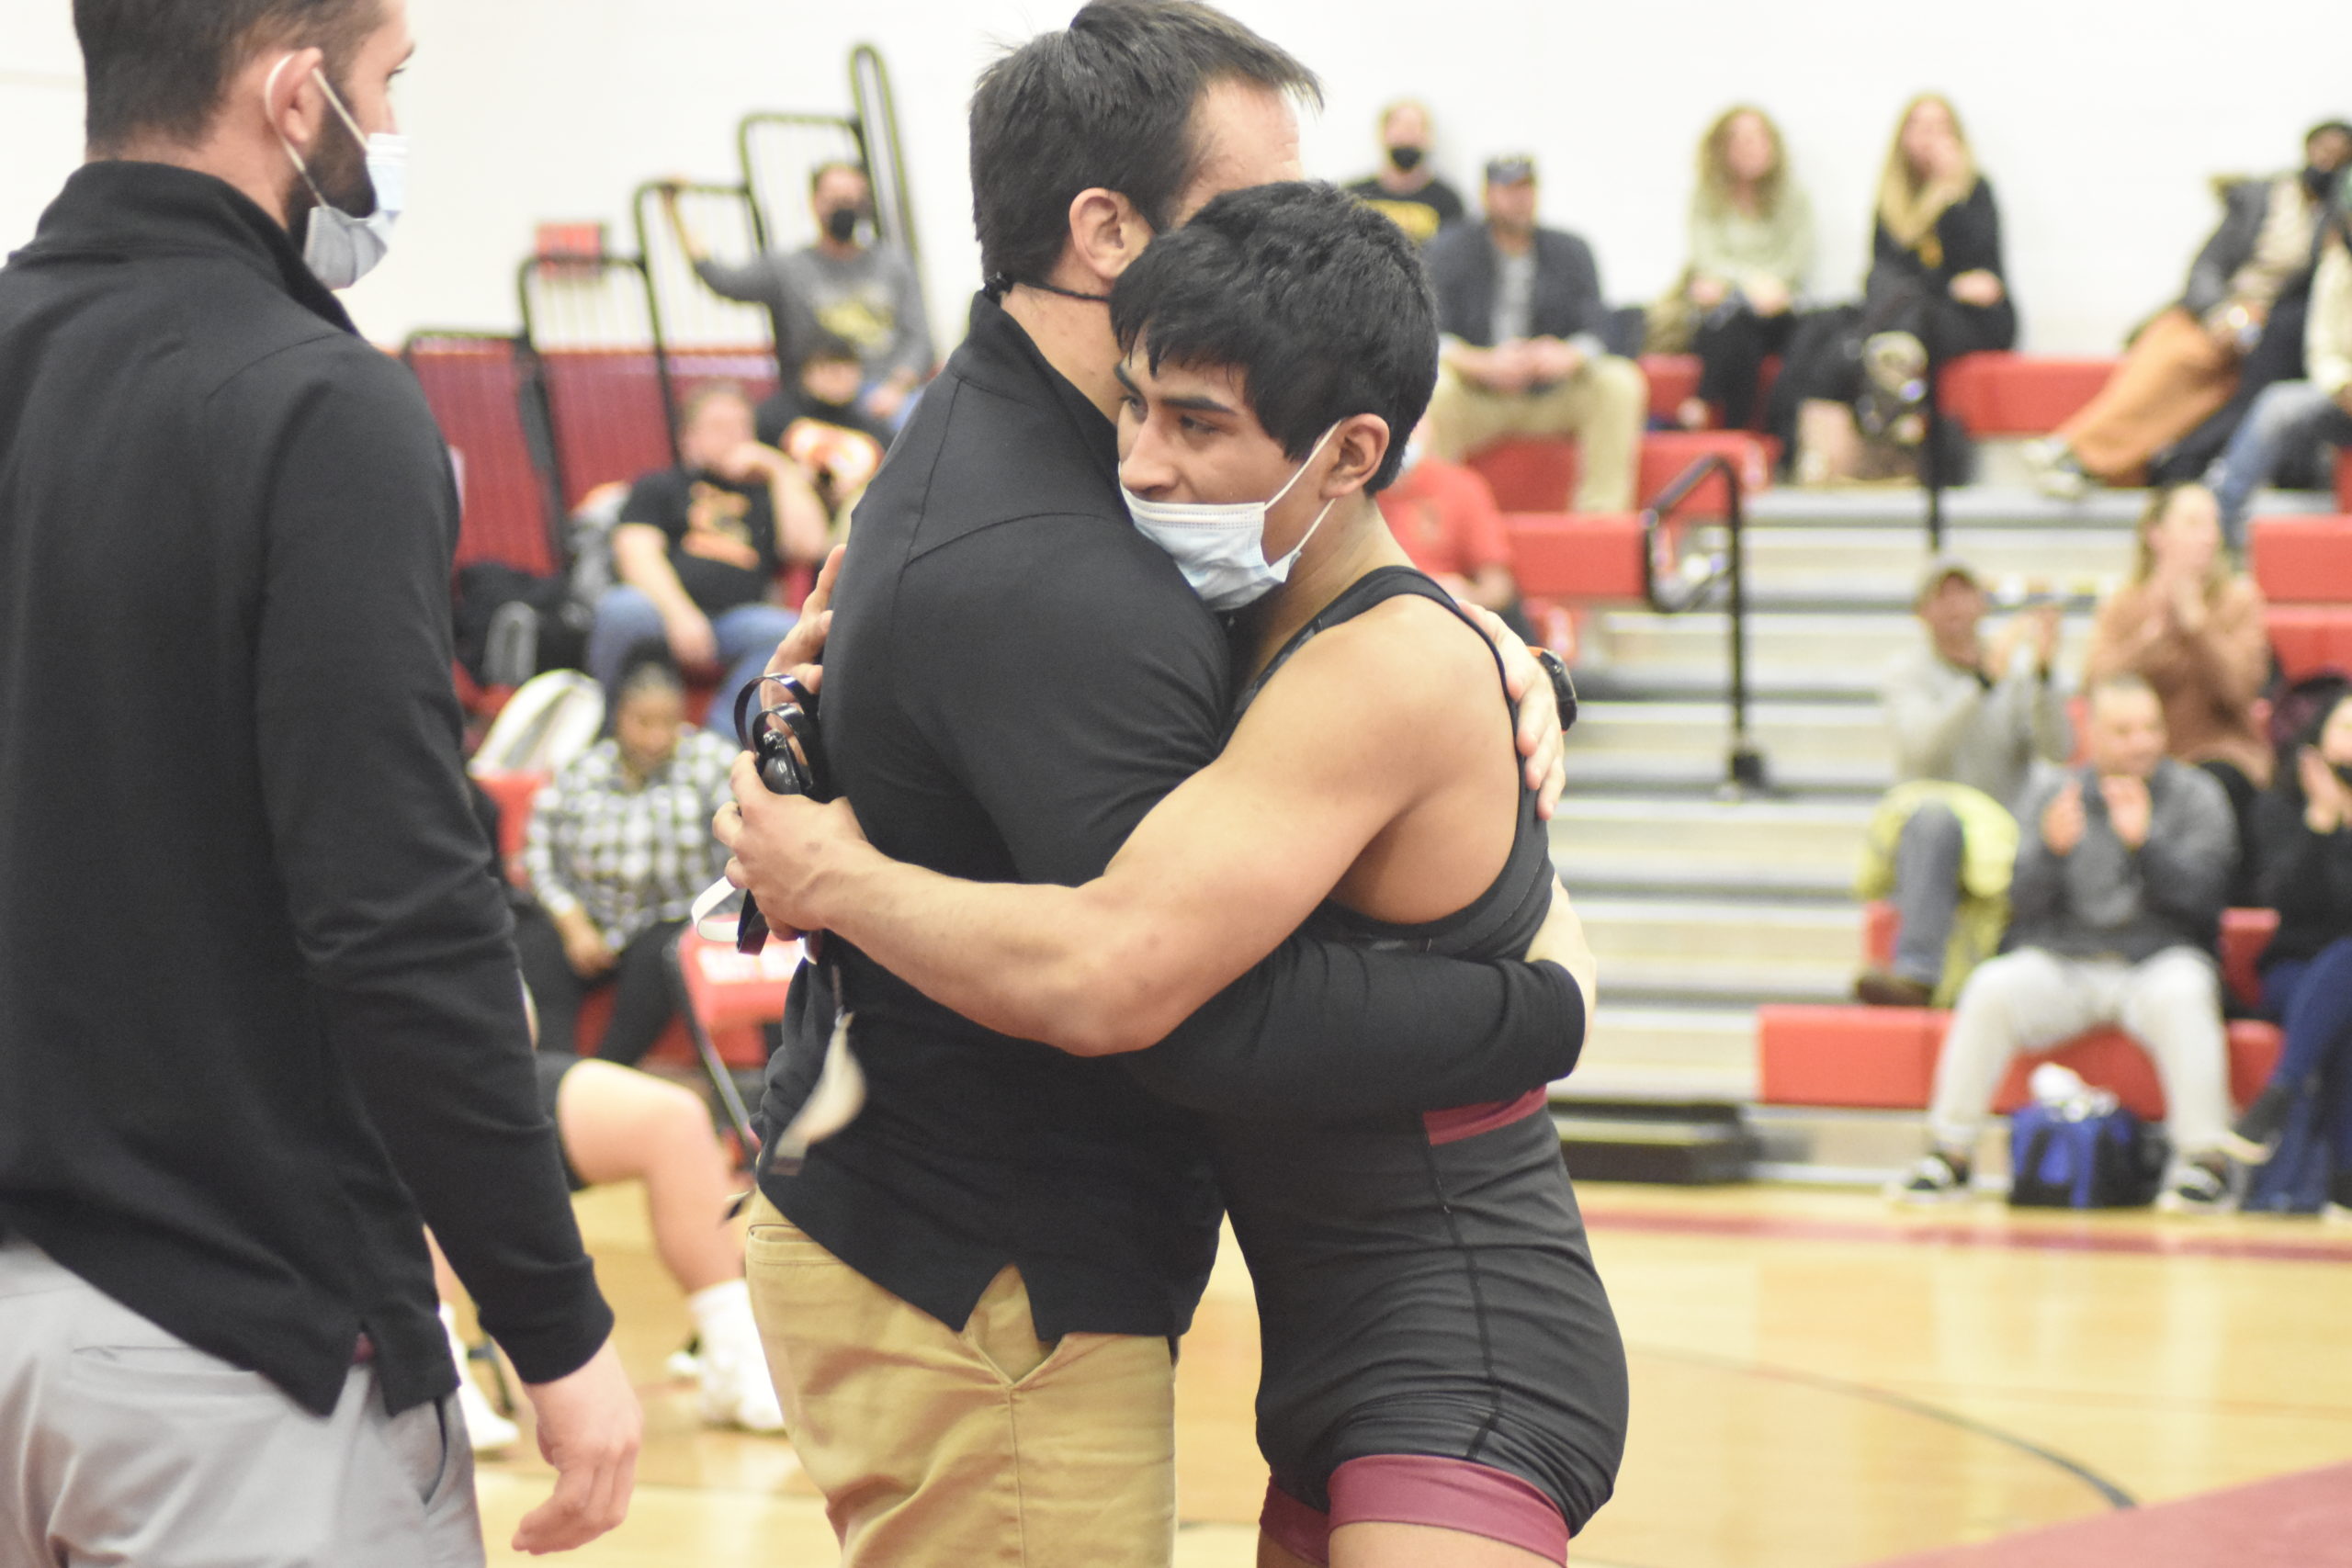 East Hampton head coach Ethan Mitchell and senior Caleb Peralta embrace one another after he suffered a 12-2 loss to Vin Ziccardi of Kings Park in the League V Championships.